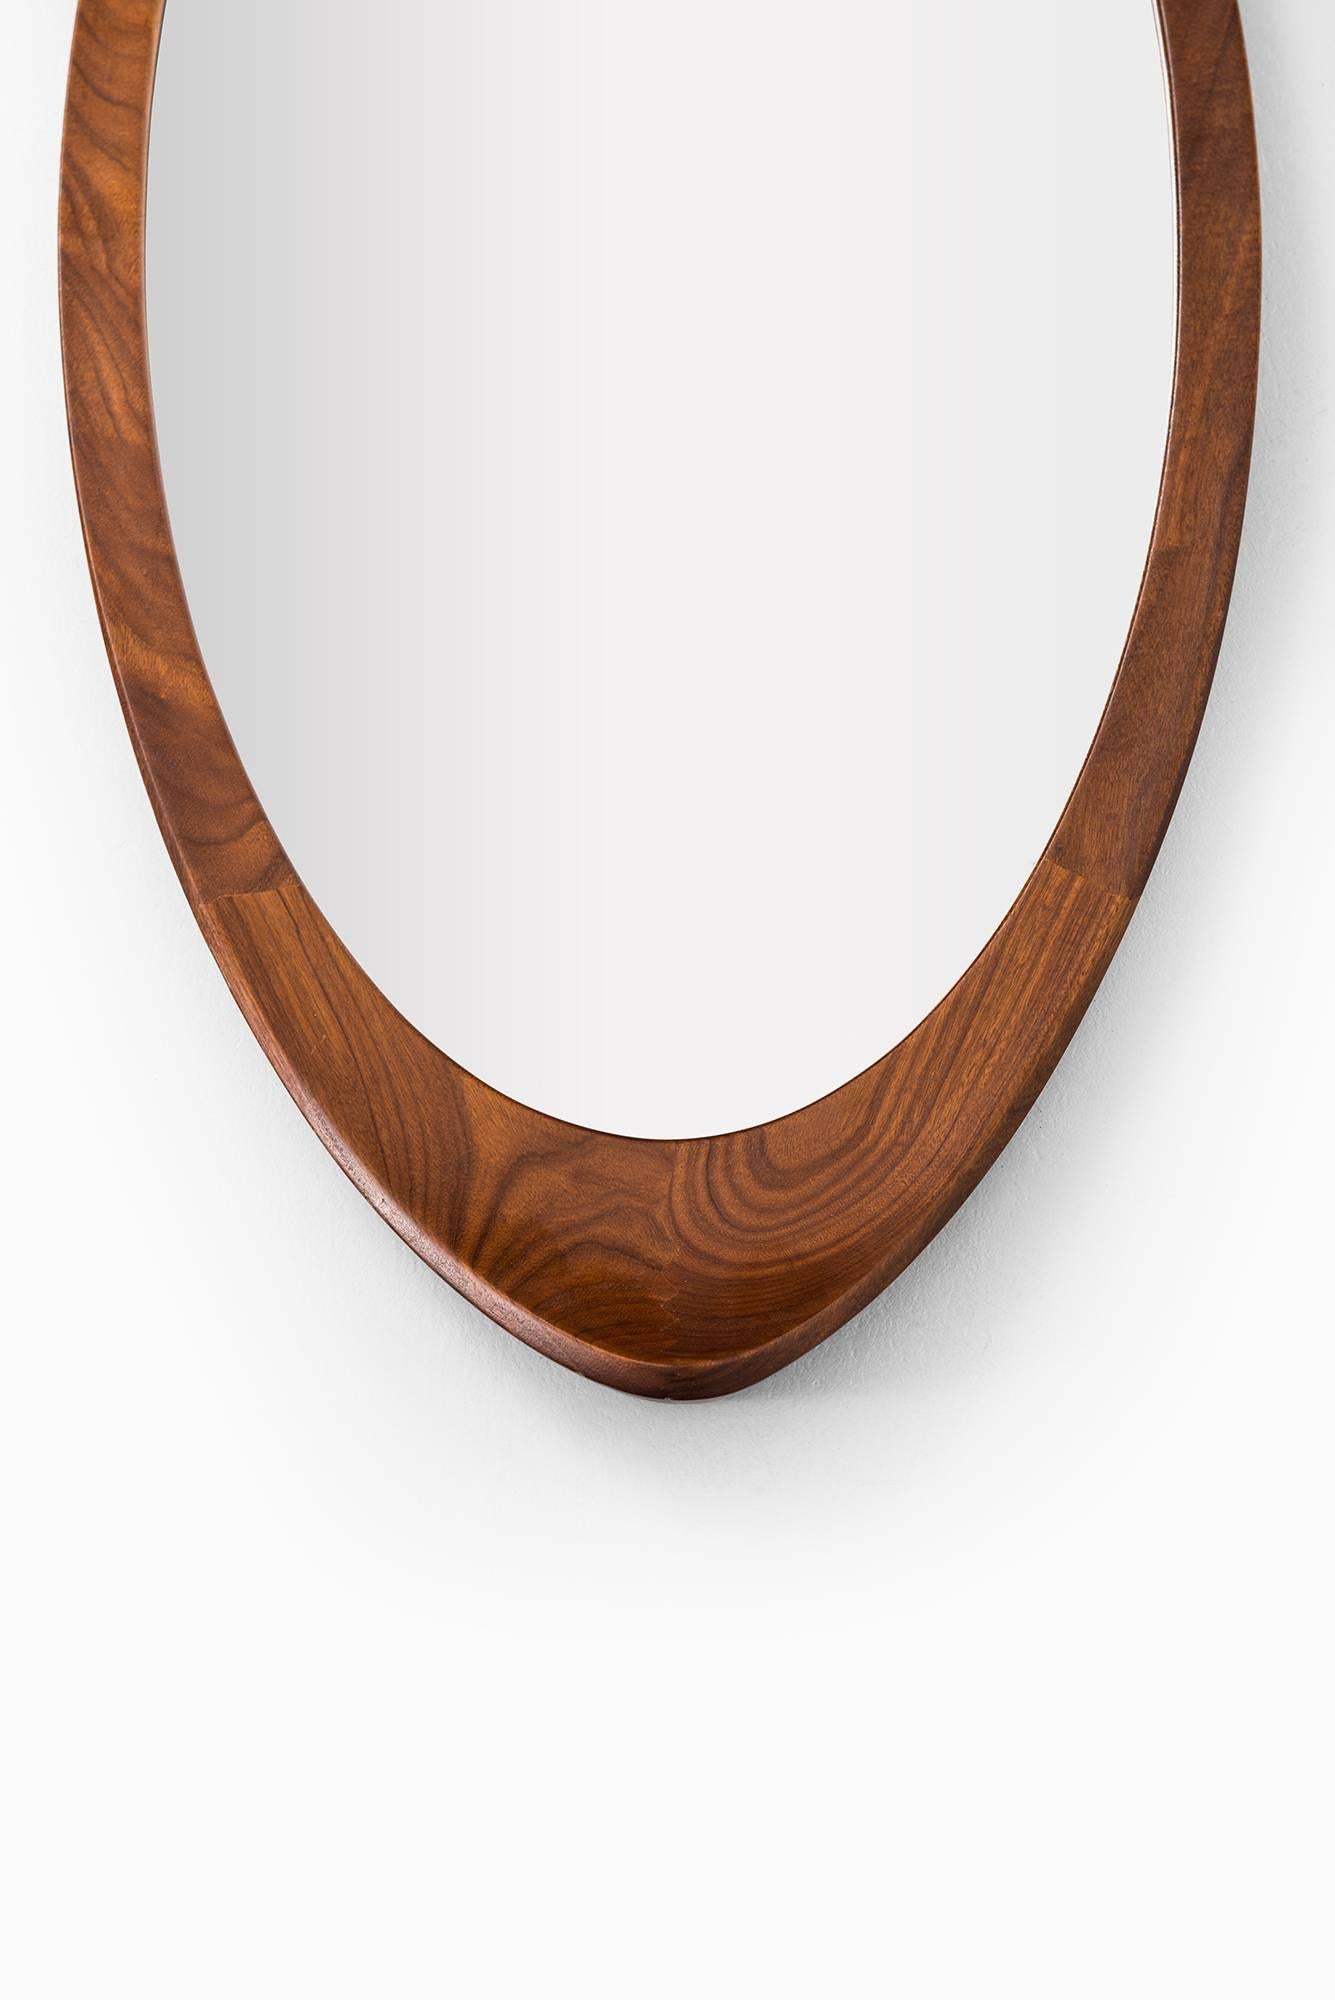 Mirror in Teak by Glas and Trä Hovmantorp in Sweden For Sale at 1stDibs ...